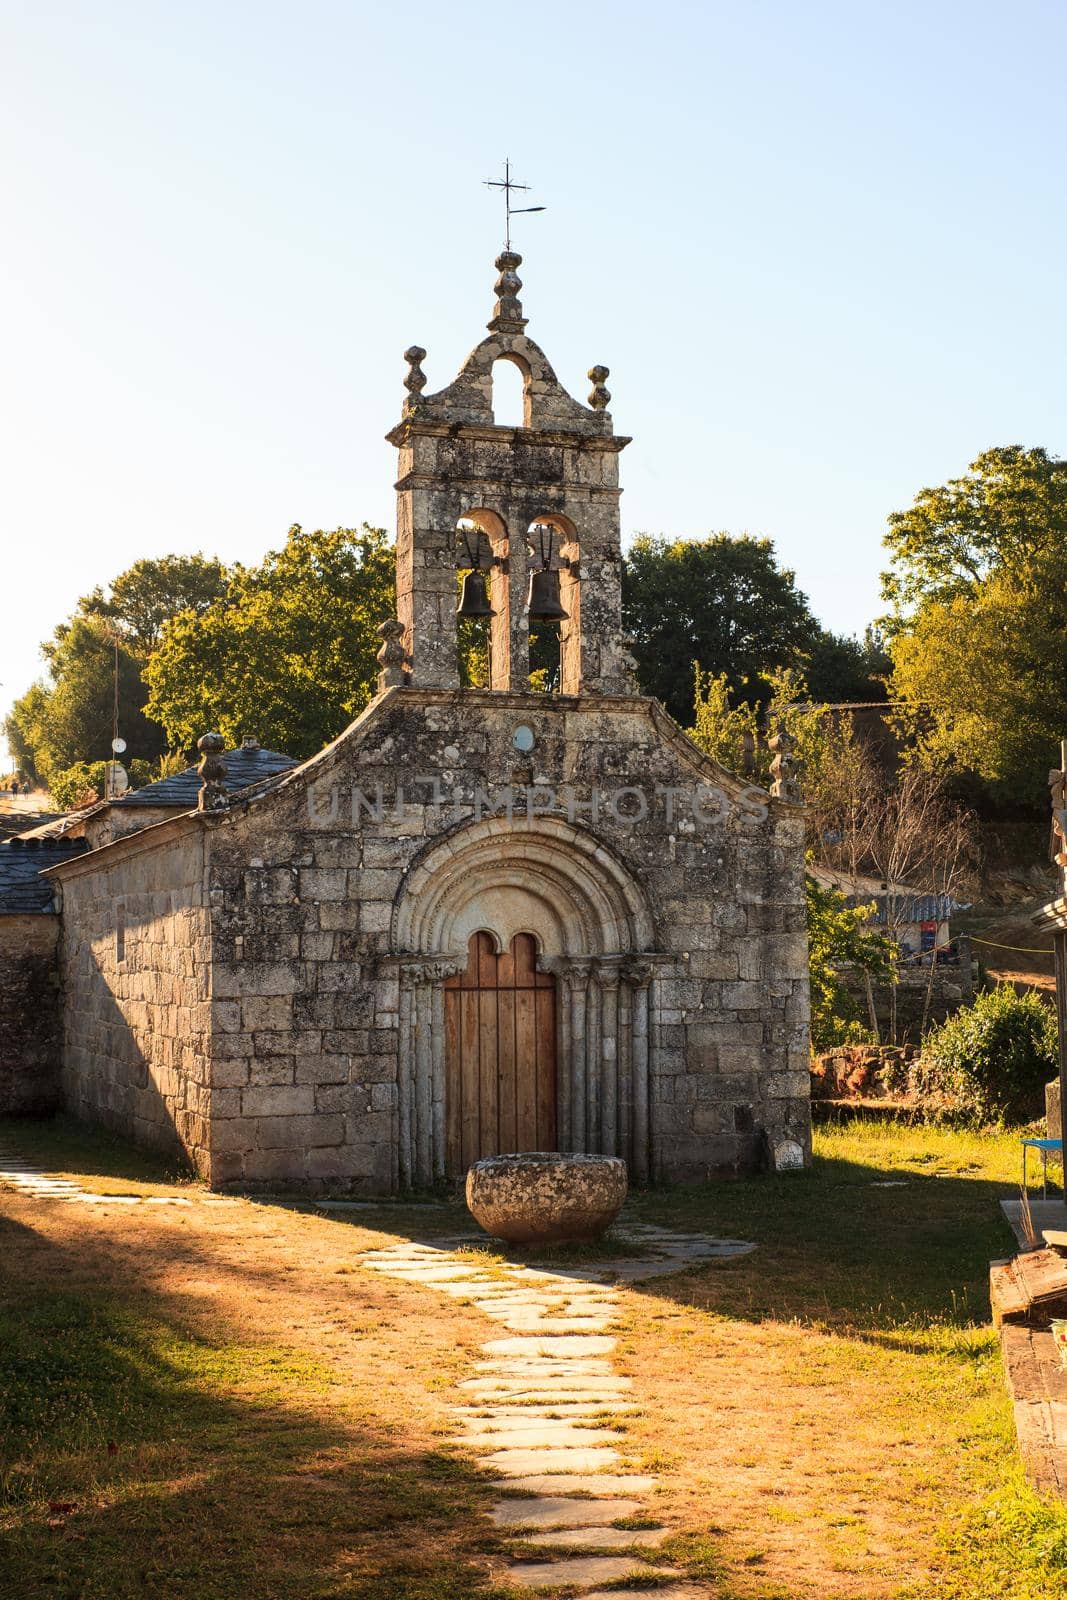 View of Little church of little town, Spain